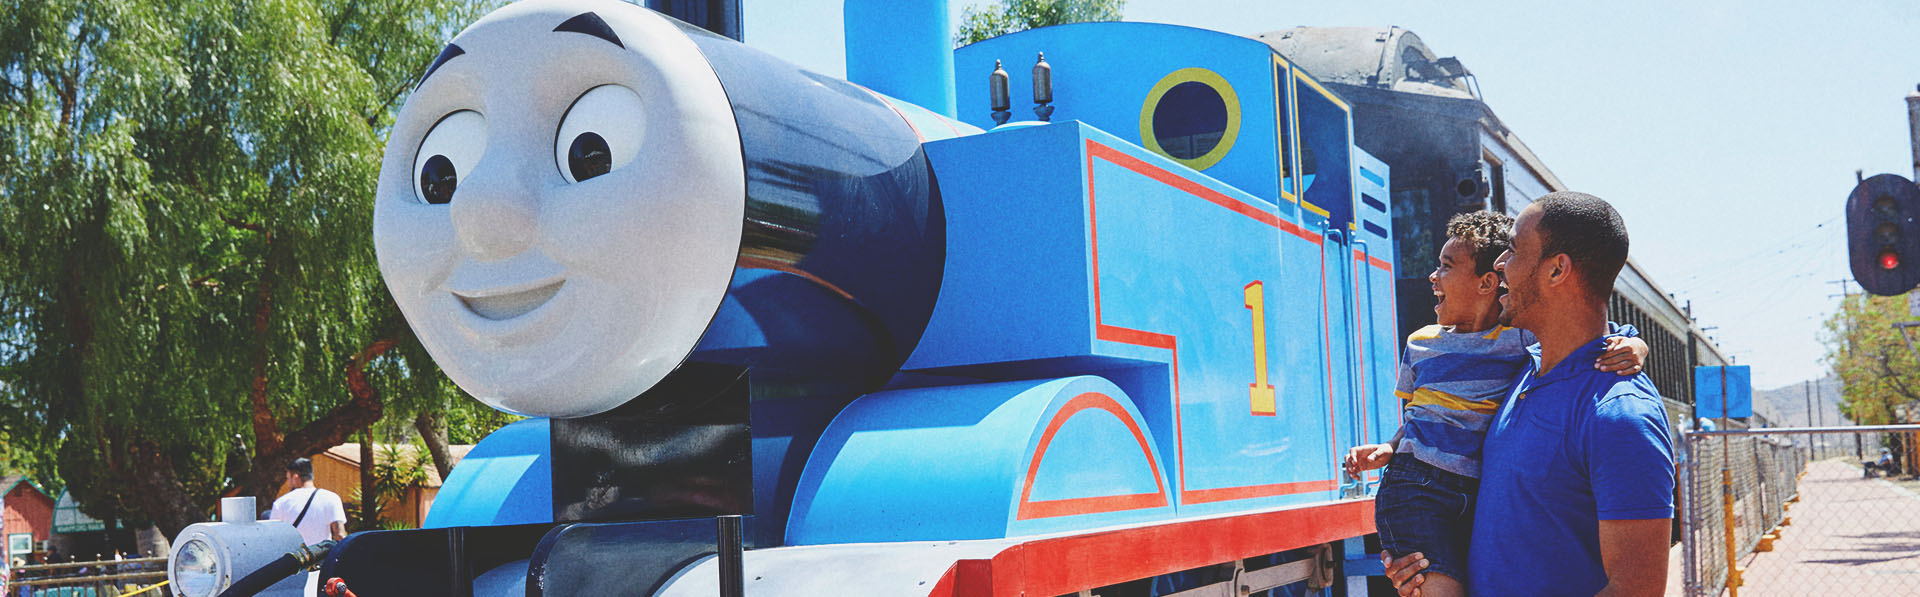 father &amp; son posing with Thomas the Engine at Heritage Park